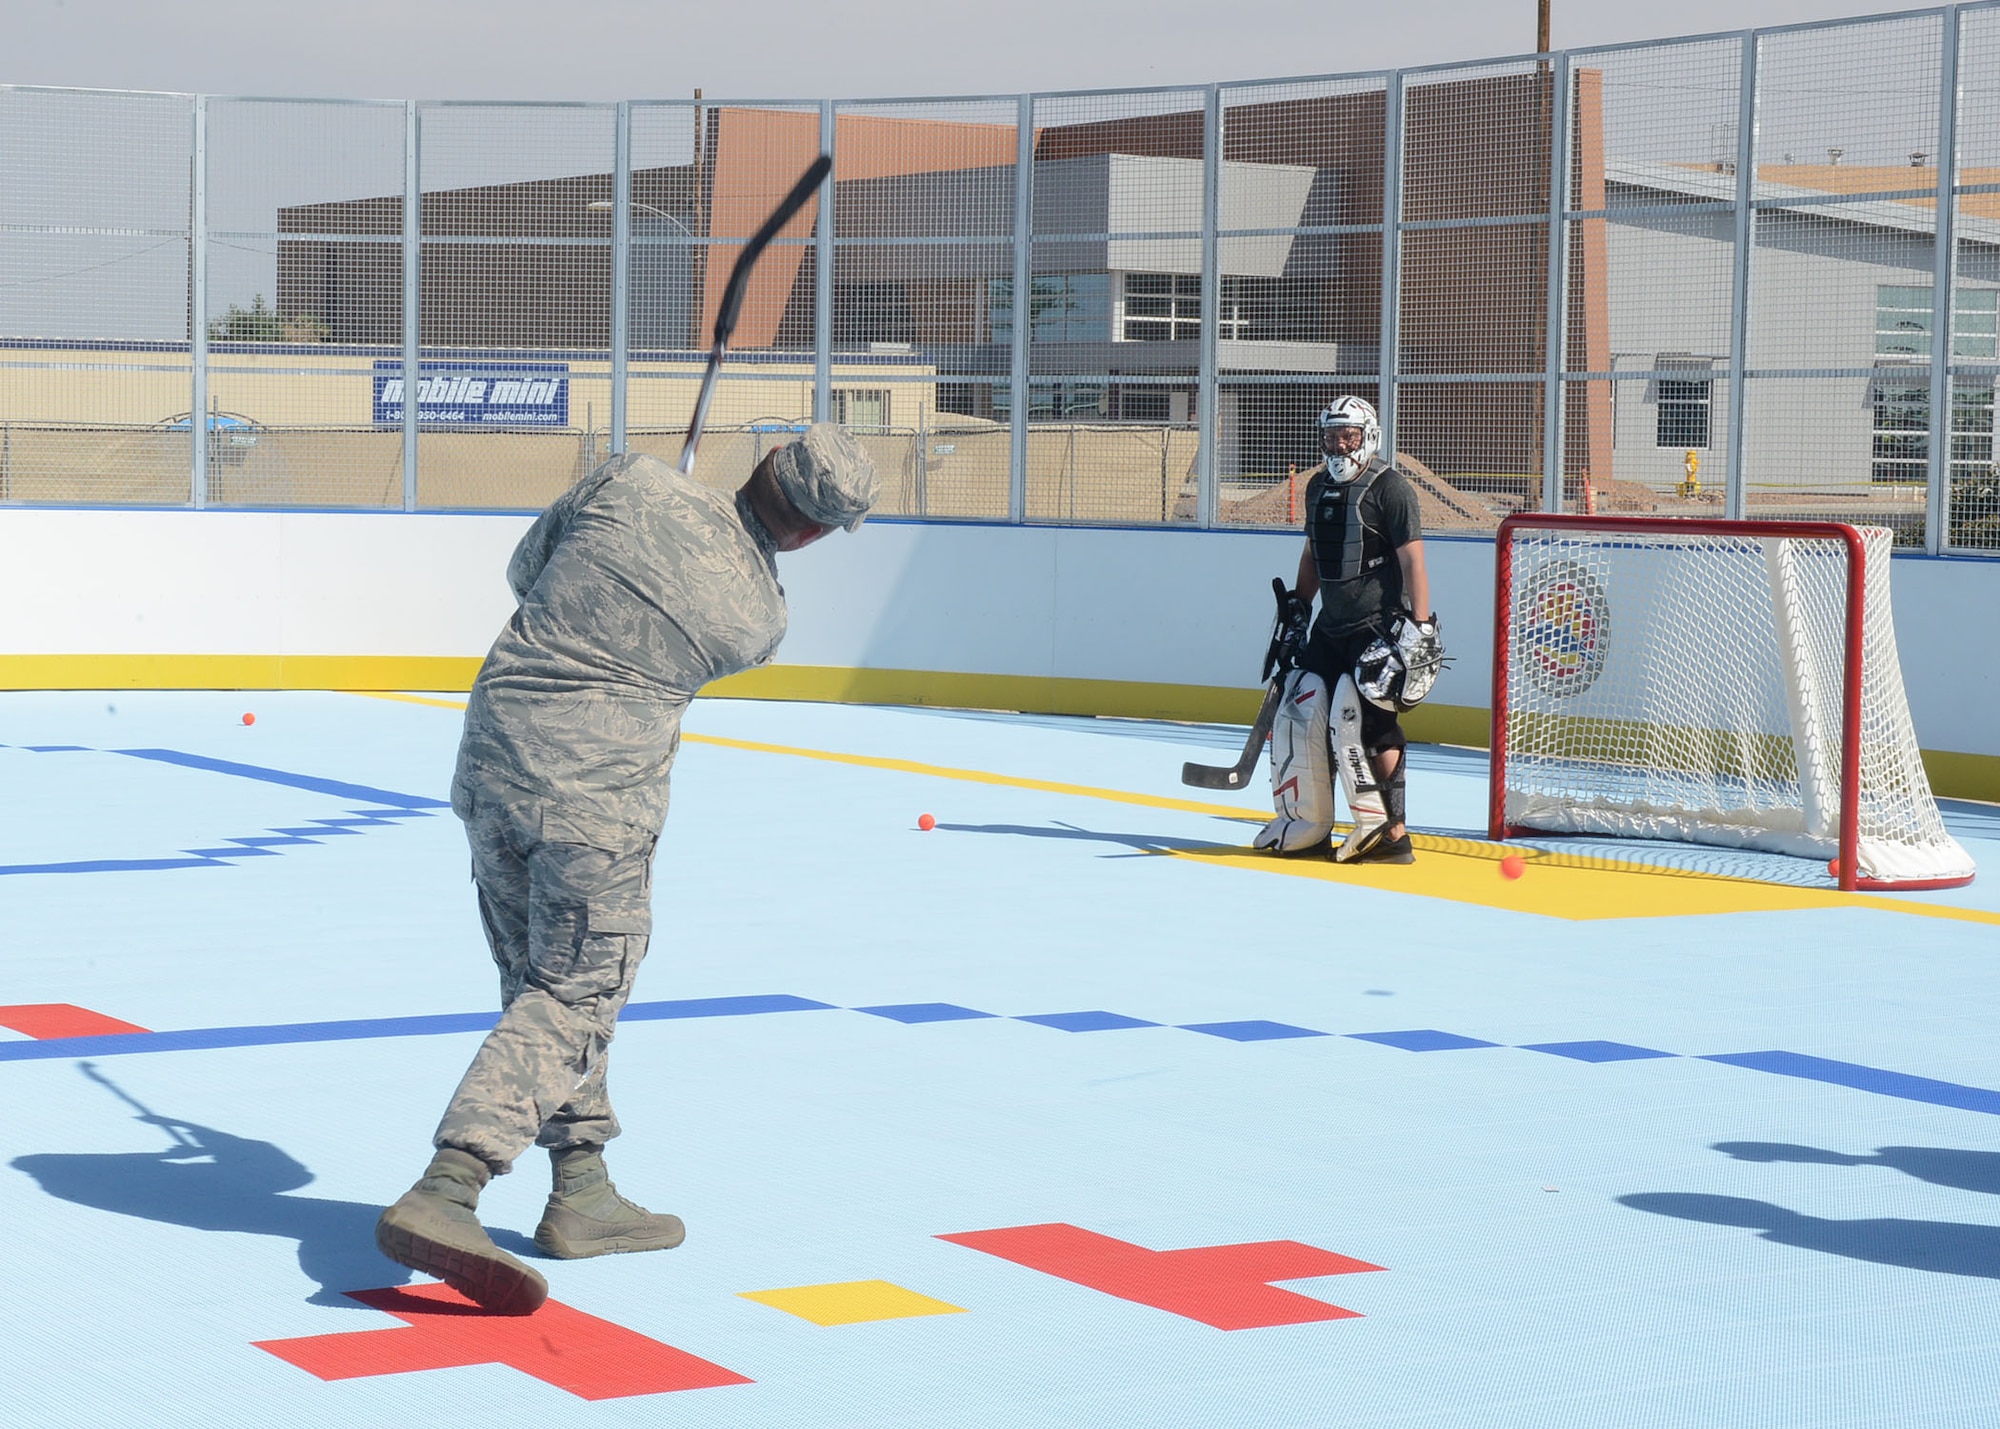 A Thunderbolt takes a shot against an Arizona Coyotes player after the ribbon cutting ceremony for the new hockey rink April 13, 2017, at Luke Air Force Base, Ariz. The rink is located adjacent to the base pool and Community Commons. (U.S. Air Force photo by Senior Airman James Hensley)